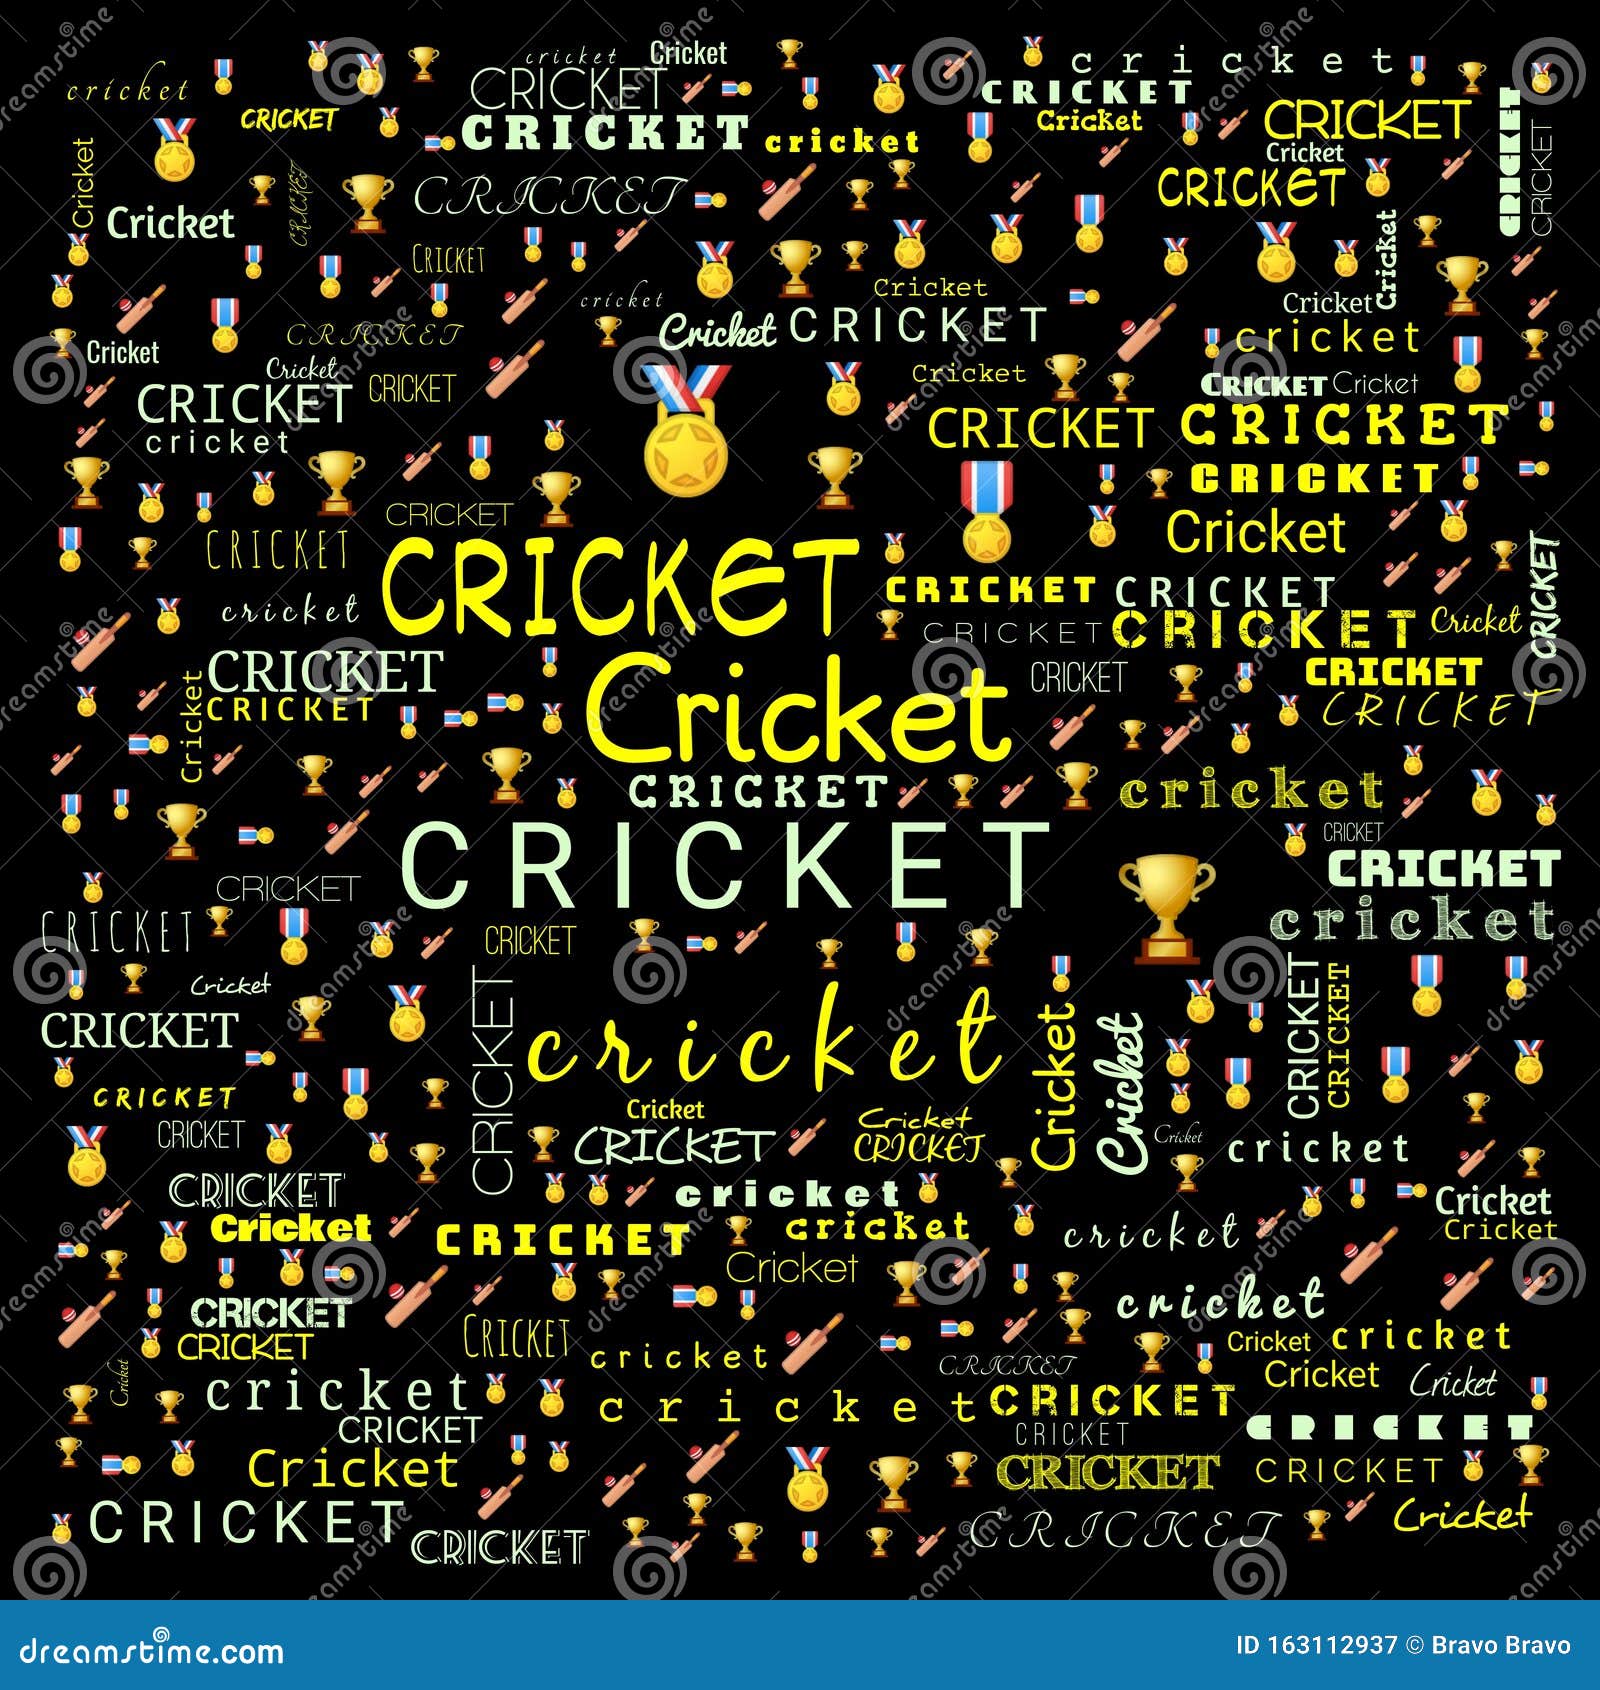 Cricket Word Cloud Use for Banner, Painting, Motivation, Web-page, Website Background, T-shirt and Shirt Printing, Poster, Gritting Stock Image